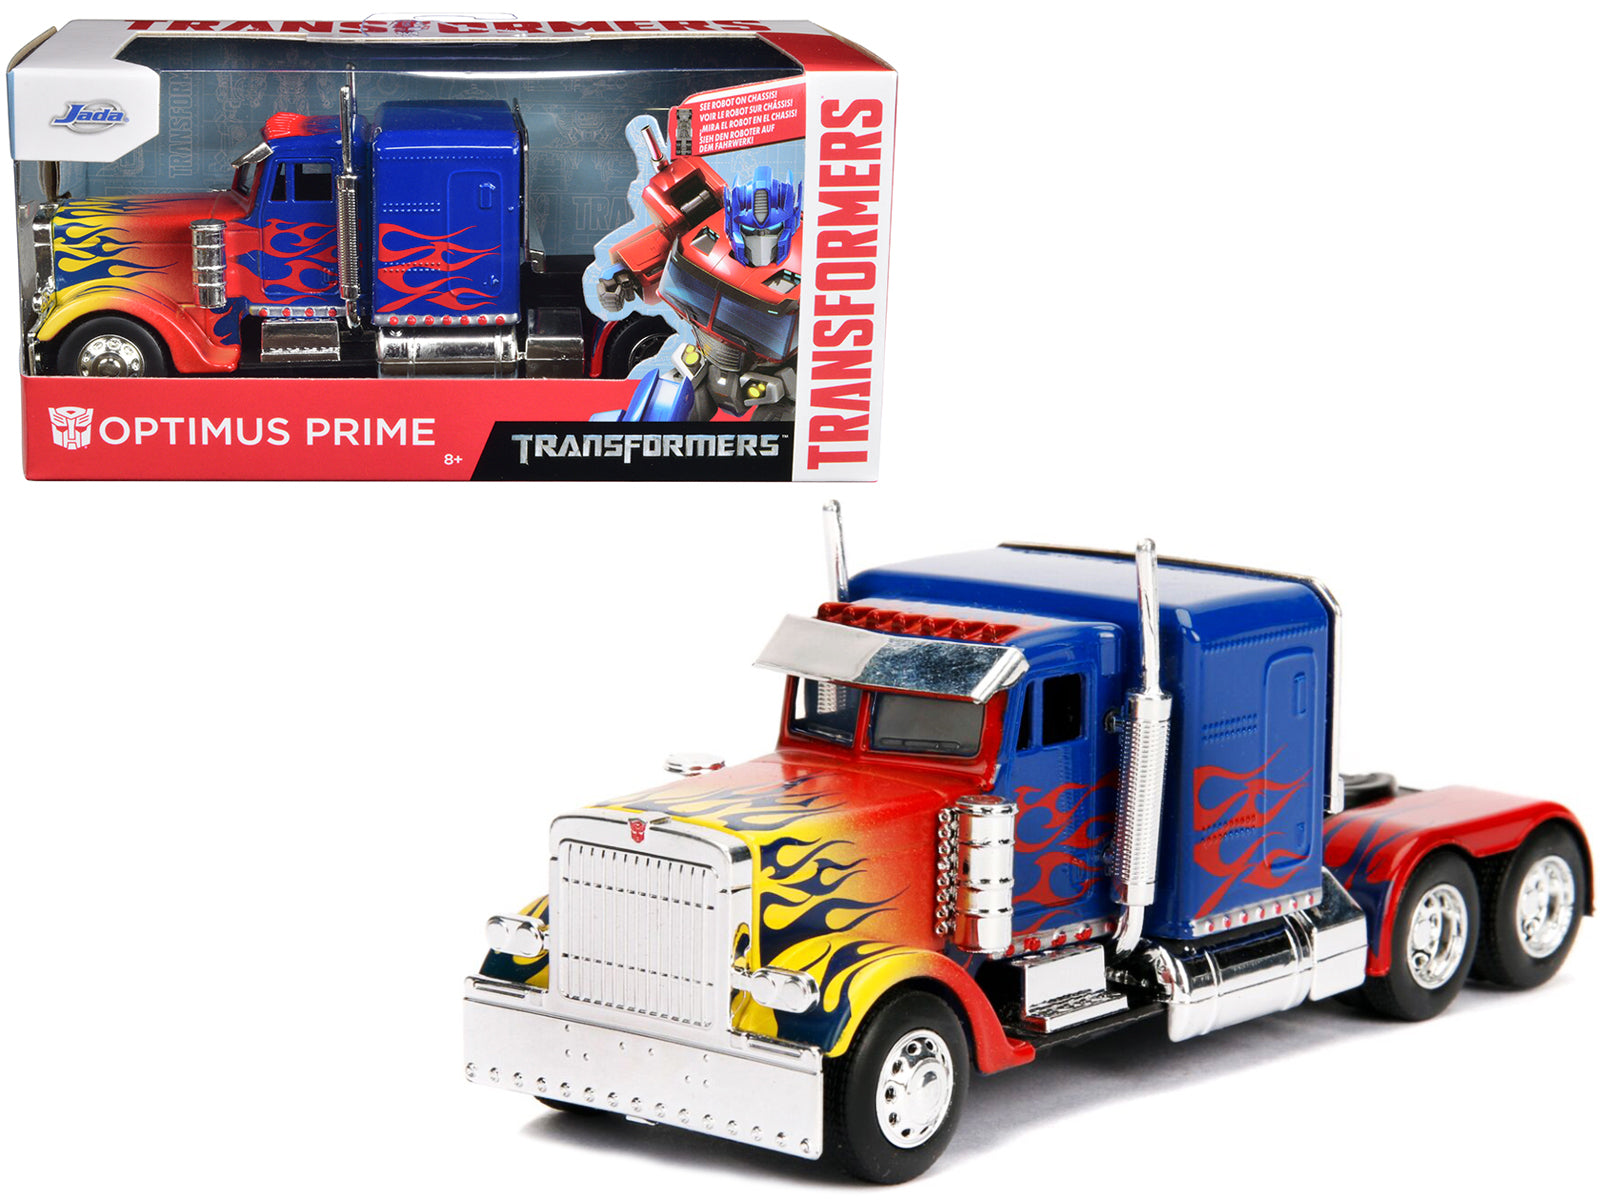 Optimus Prime Truck with Robot on Chassis from "Transformers" Movie "Hollywood Rides" Series 1/32 Diecast Model by Jada